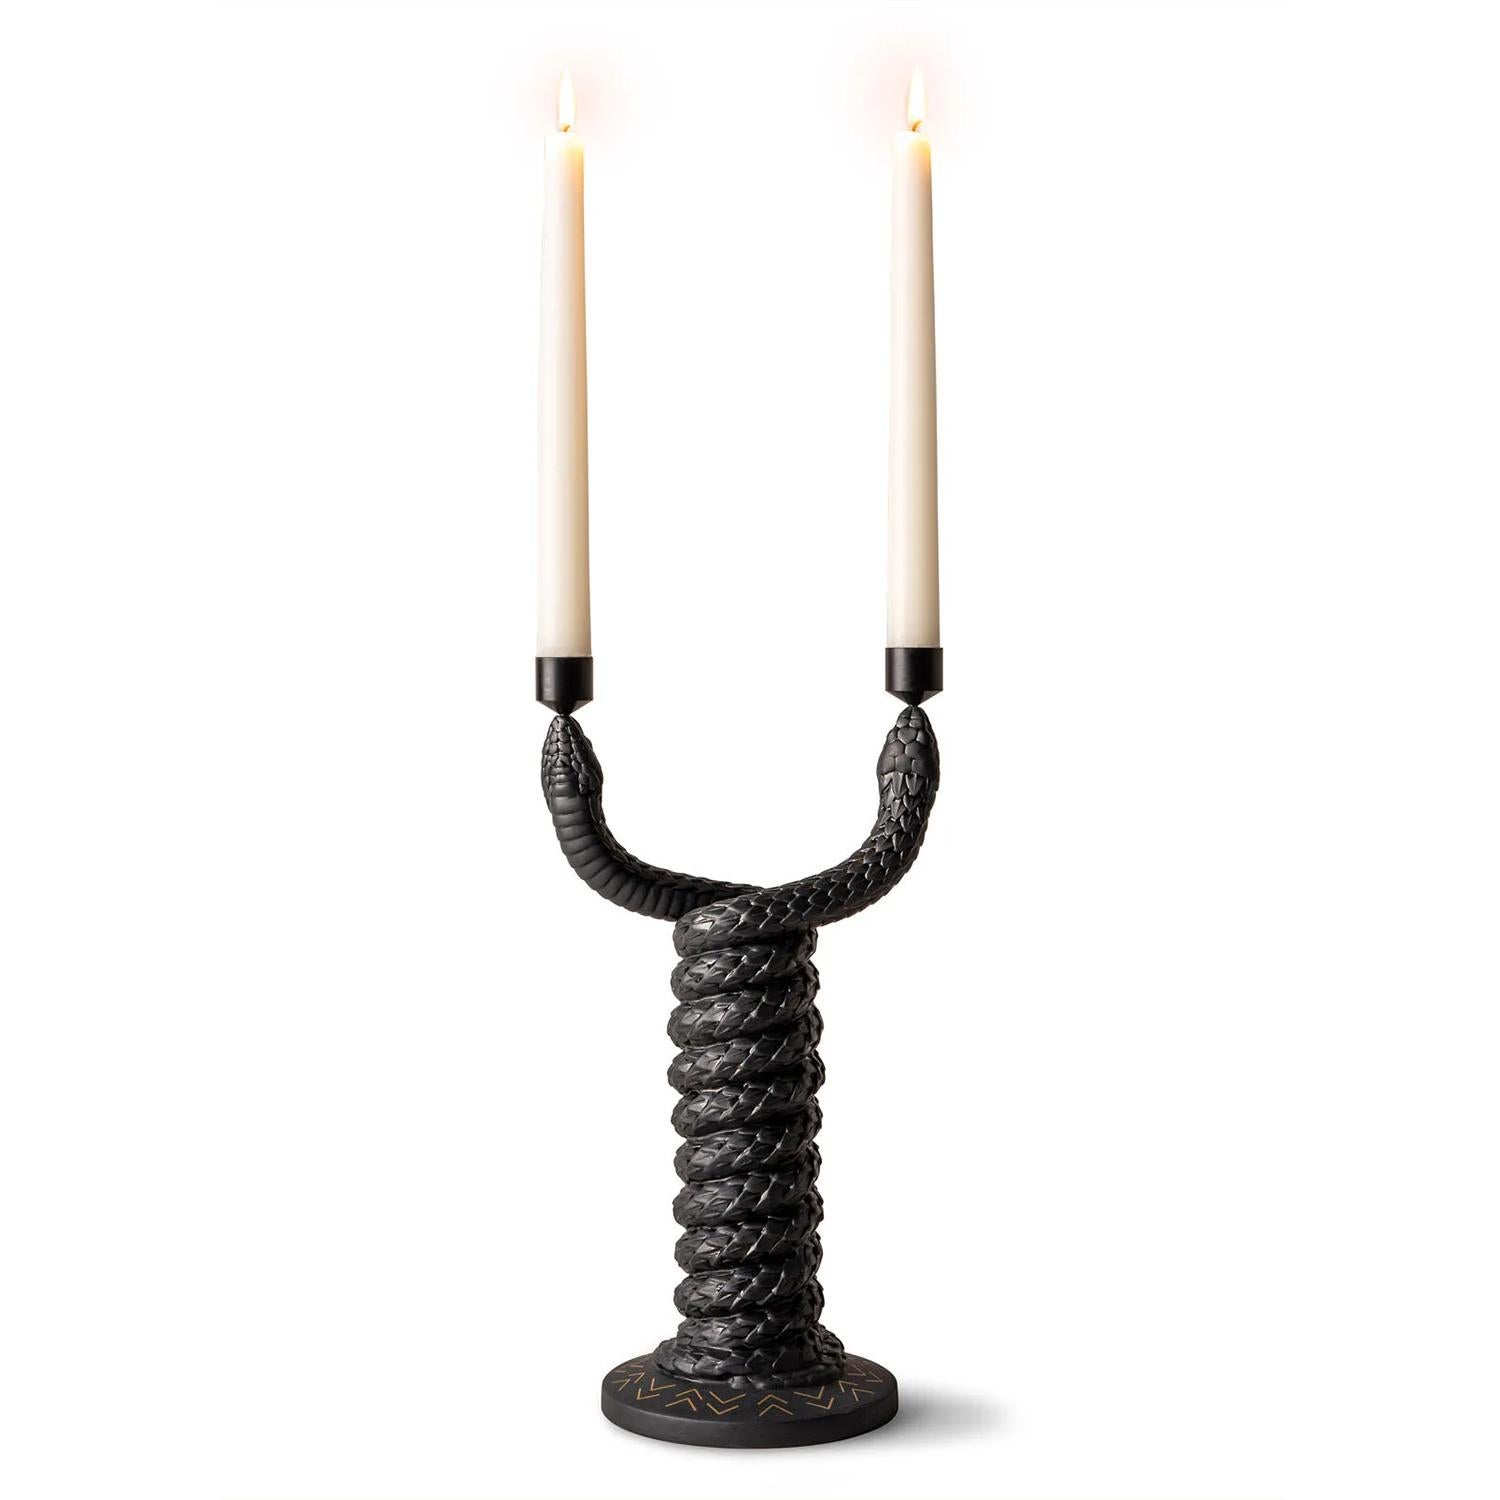 Candleholder Serpent Torsade with all structure in porcelain
in matte black finish, for 2 candles, candles not included.